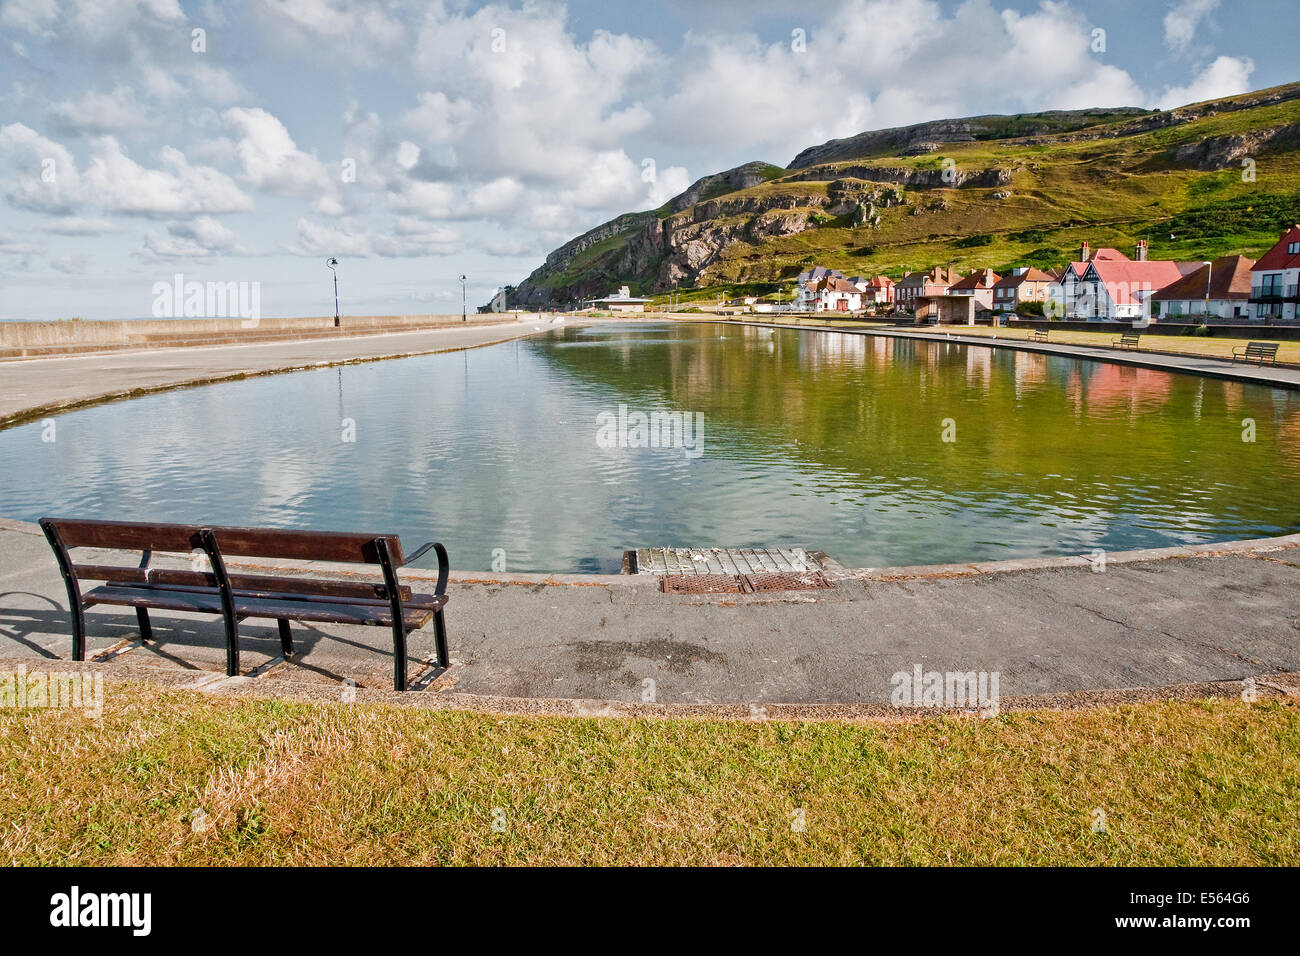 Early morning sunlight on the Model Boating Lake, West Shore, Llandudno, with the Great Orme in the background Stock Photo